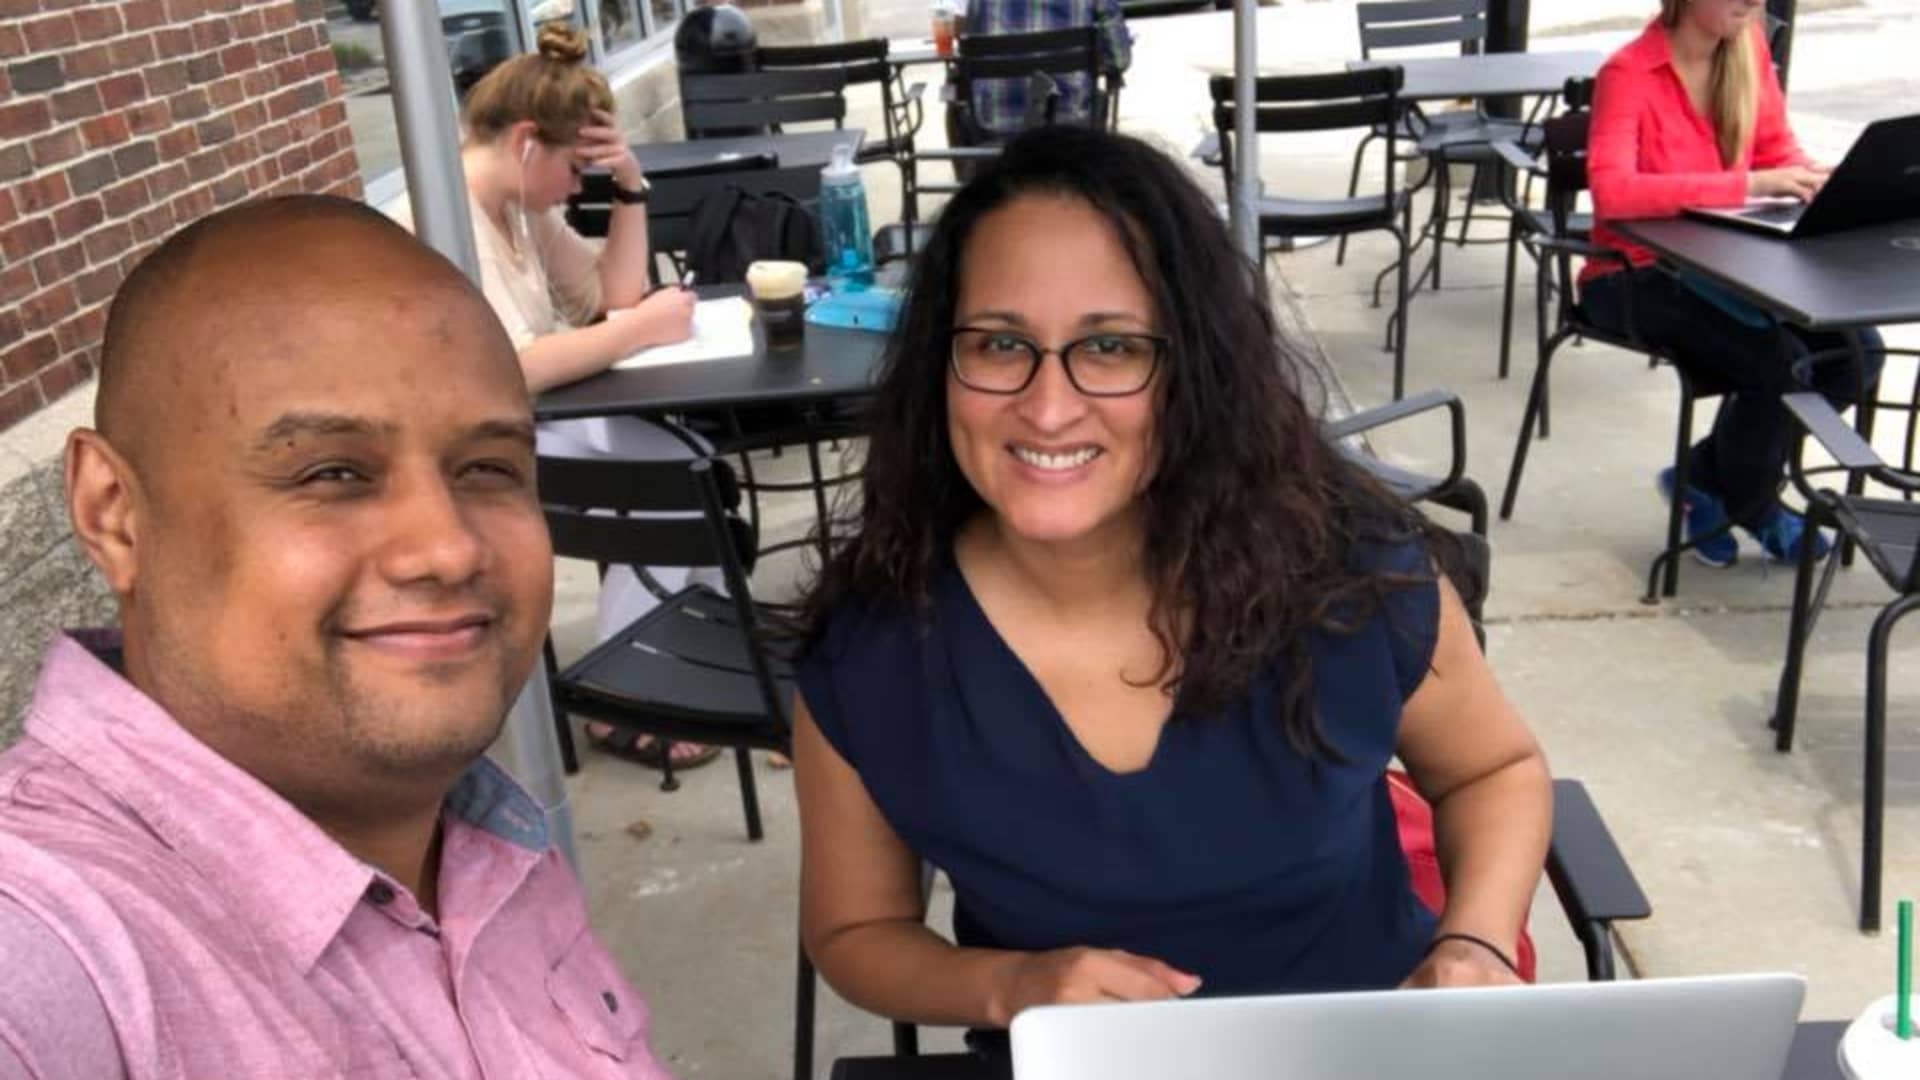 Kimanzi Constable and his wife like to work from local coffee shops like Breaking Wave coffee when they visit Sarasota — but sometimes they just go to Starbucks!